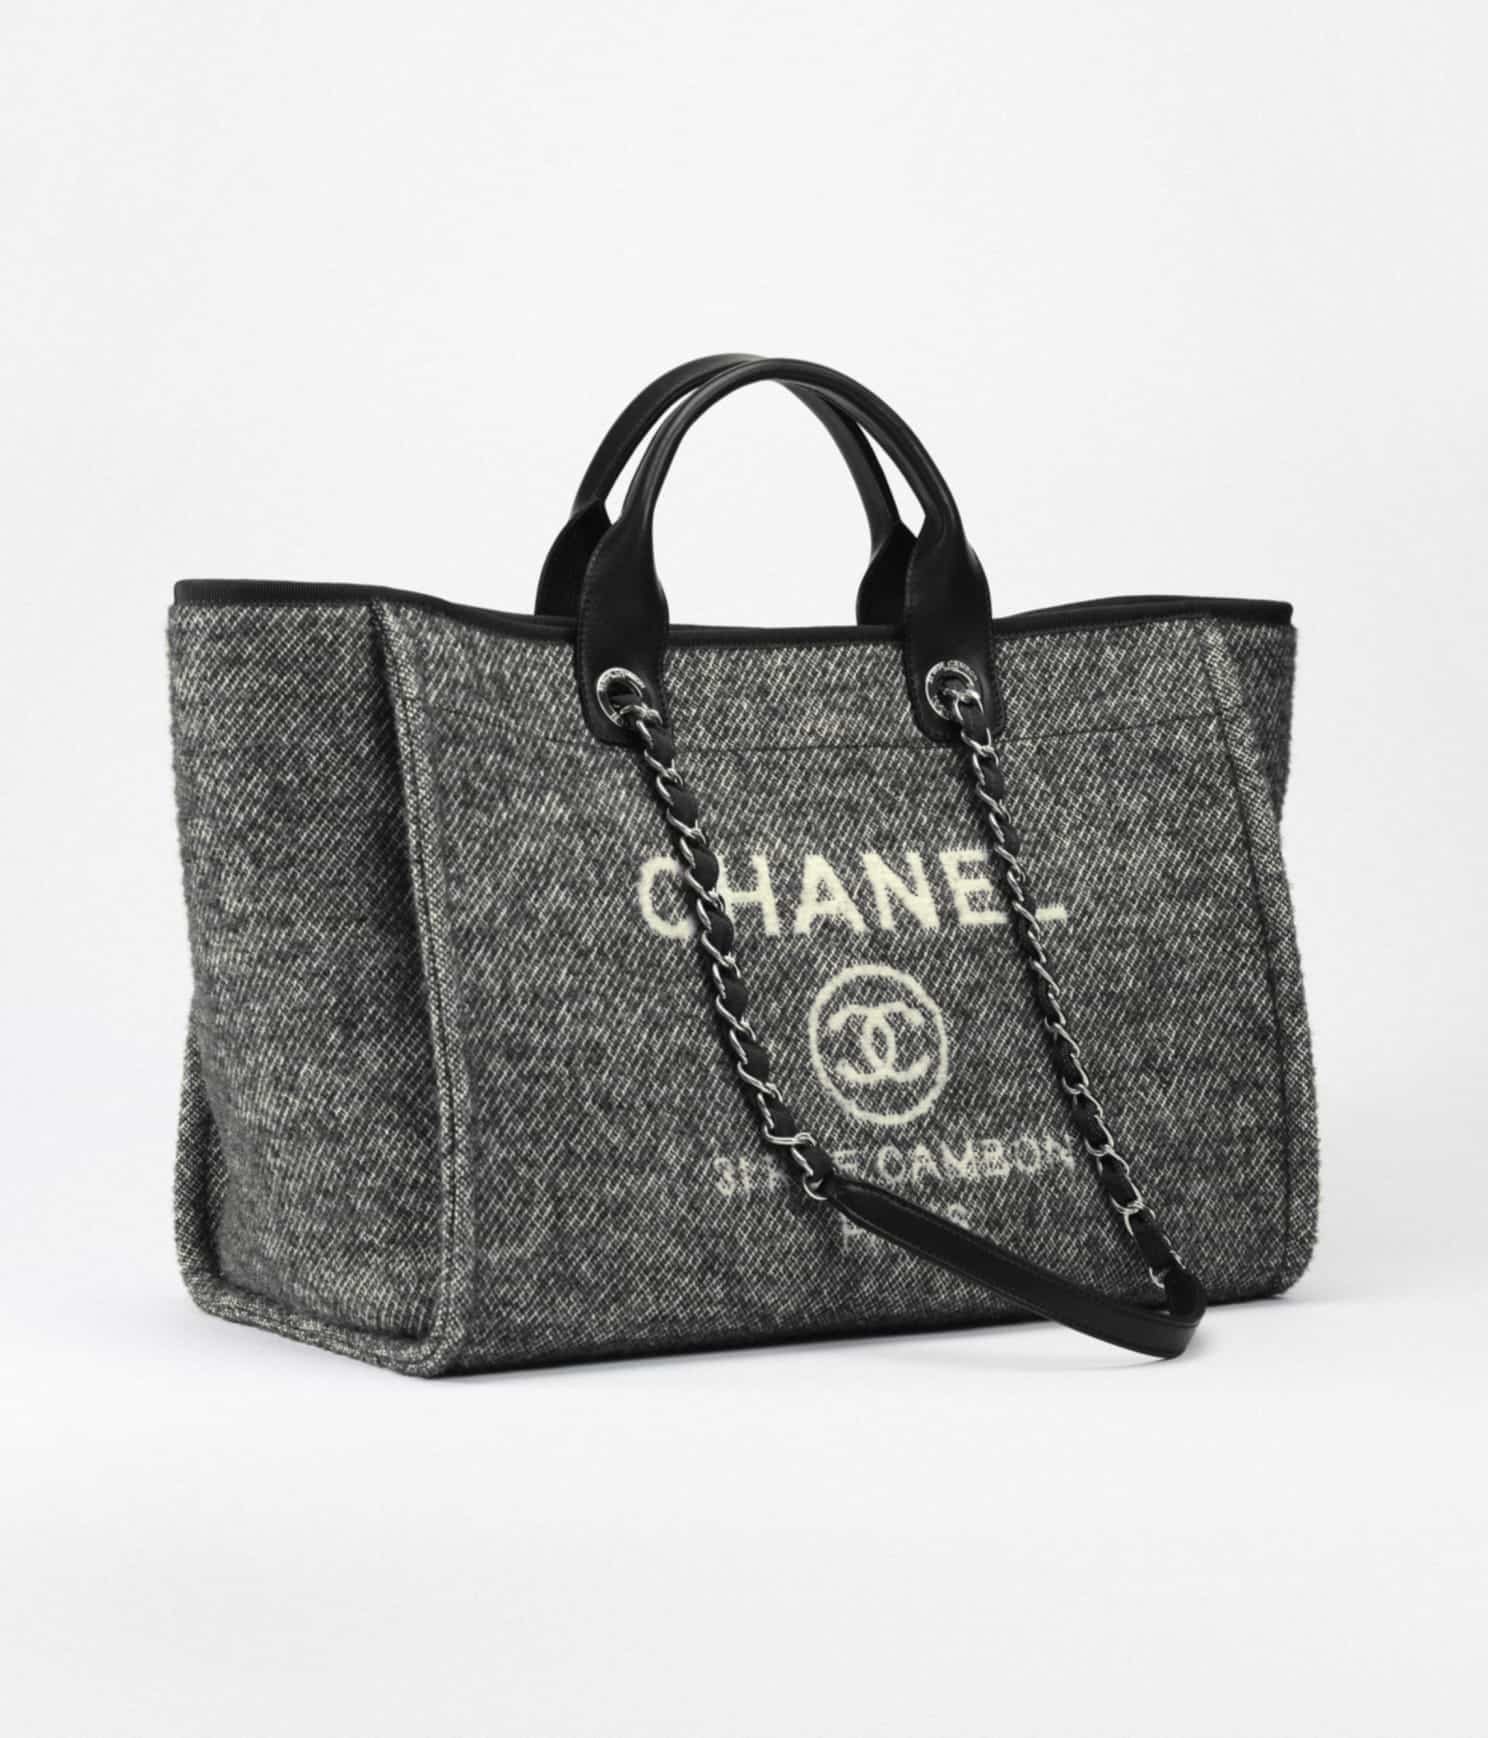 Top 10 Diaper Bags : Hermes, Chanel and Versace - Luxe Front